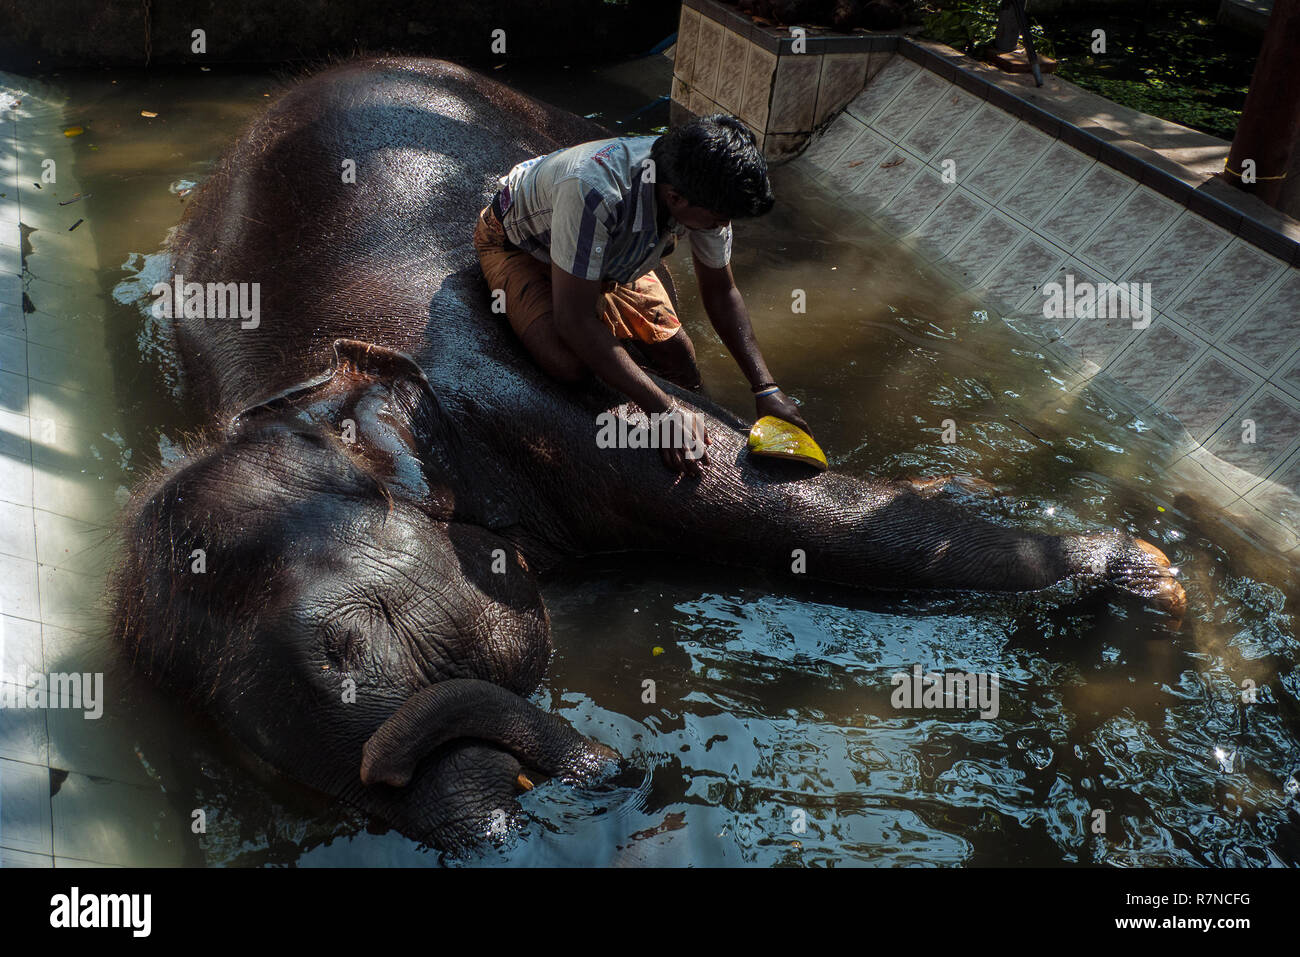 Colombo, Sri Lanka: a man washes a small elephant in the tub of the Gangaramaya Buddhist Temple in Colombo city Stock Photo